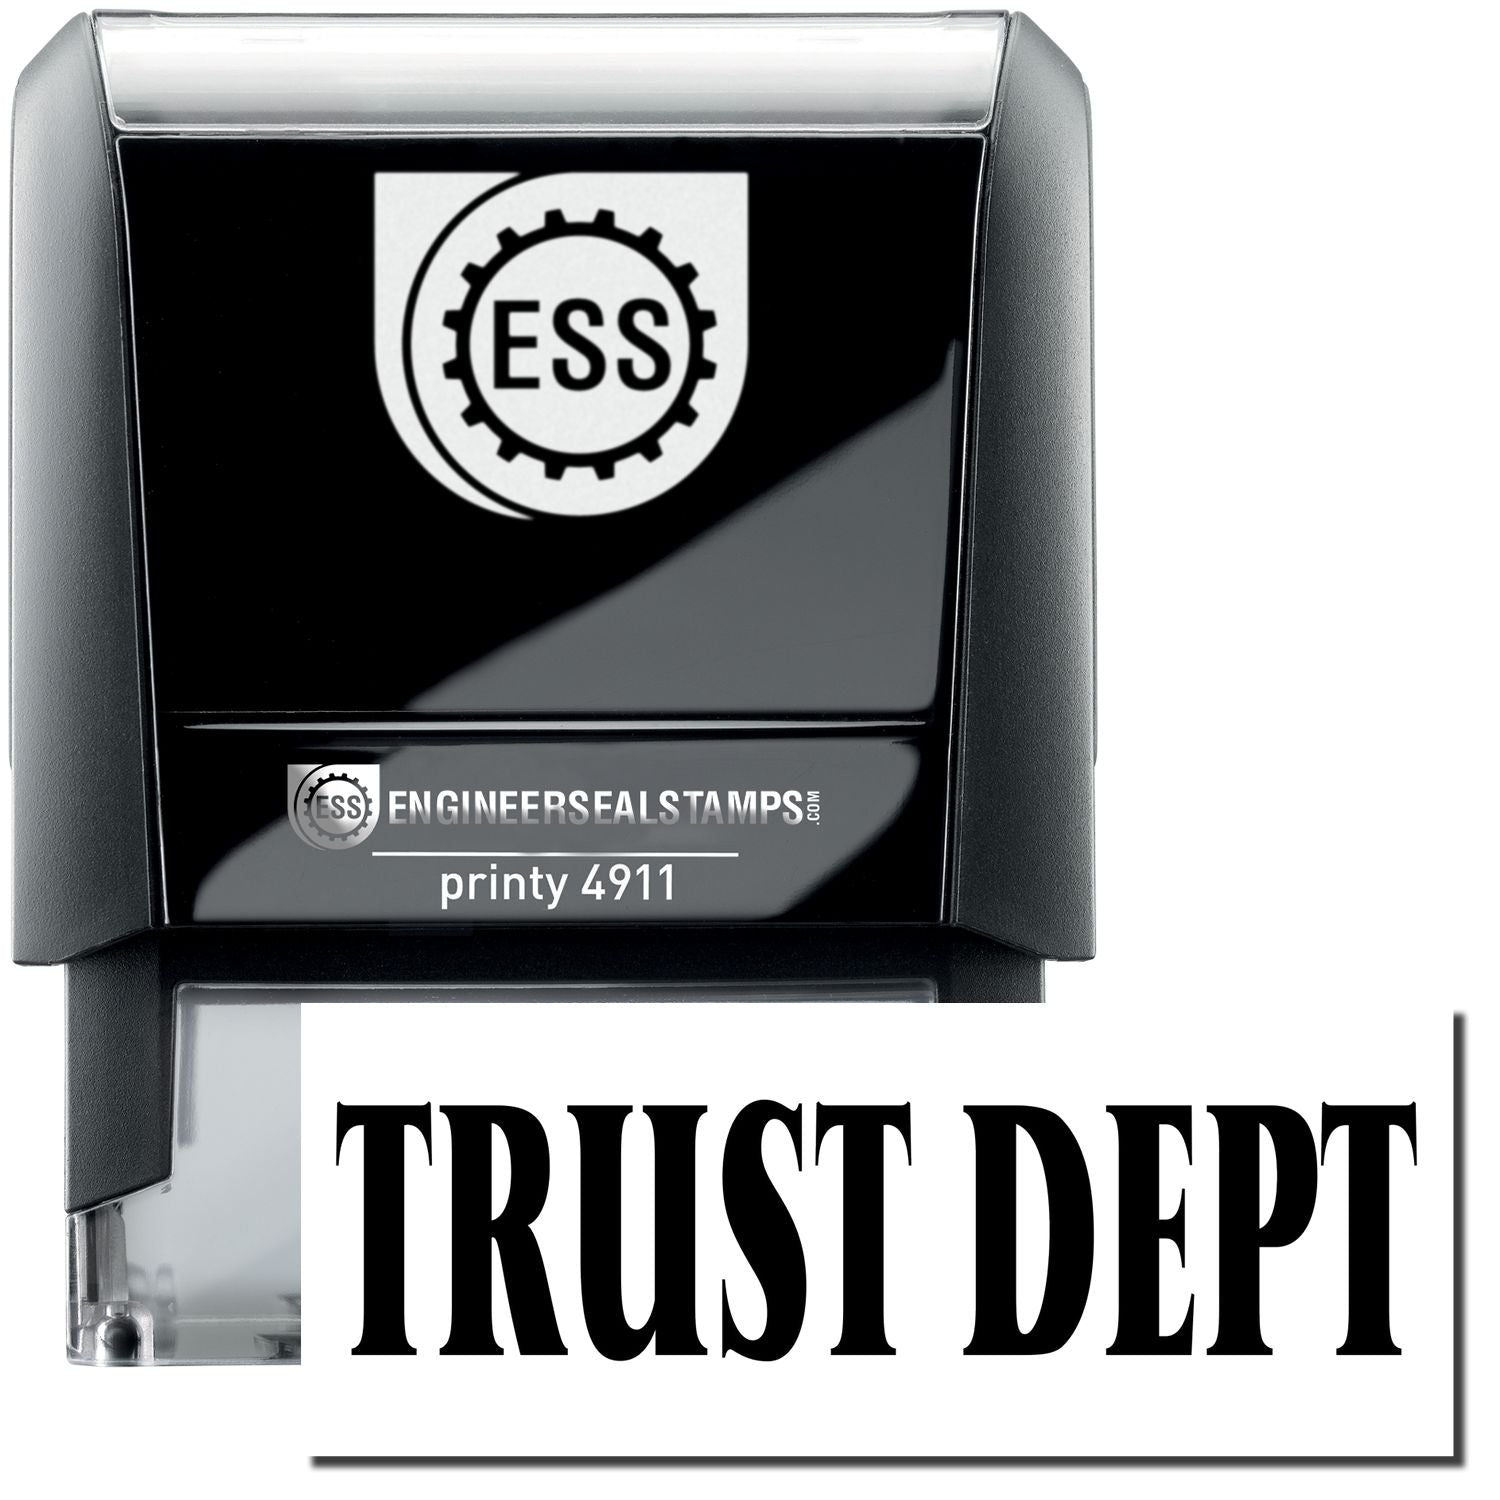 A self-inking stamp with a stamped image showing how the text "TRUST DEPT" is displayed after stamping.